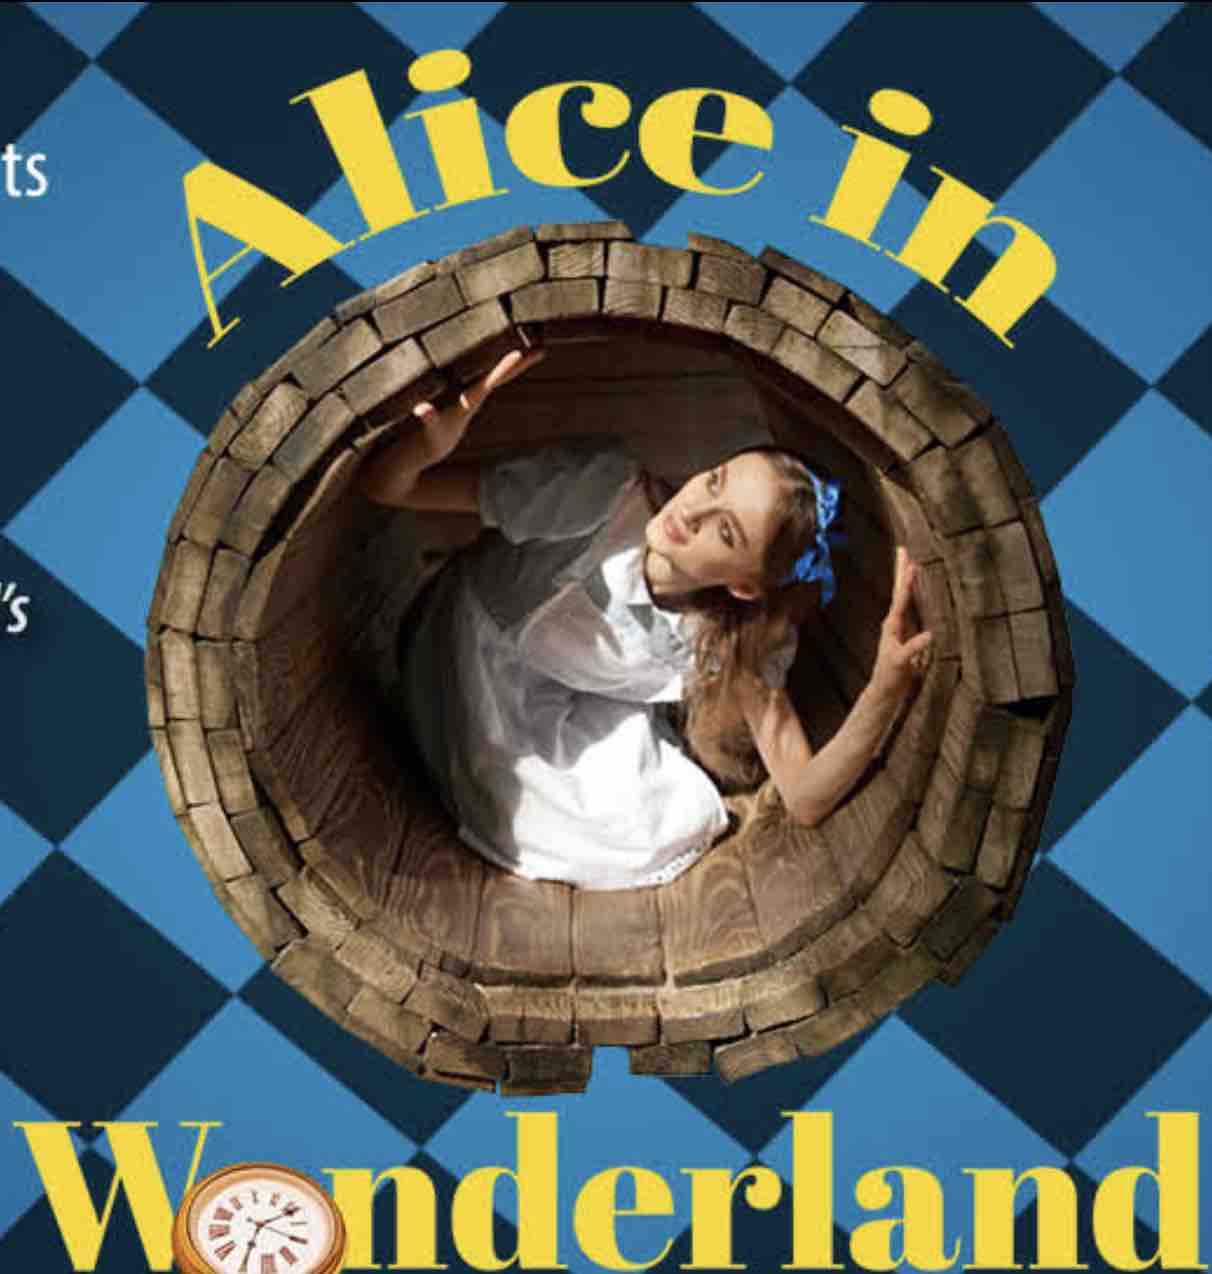 The Palace Stamford: Connecticut Ballet – Alice in Wonderland